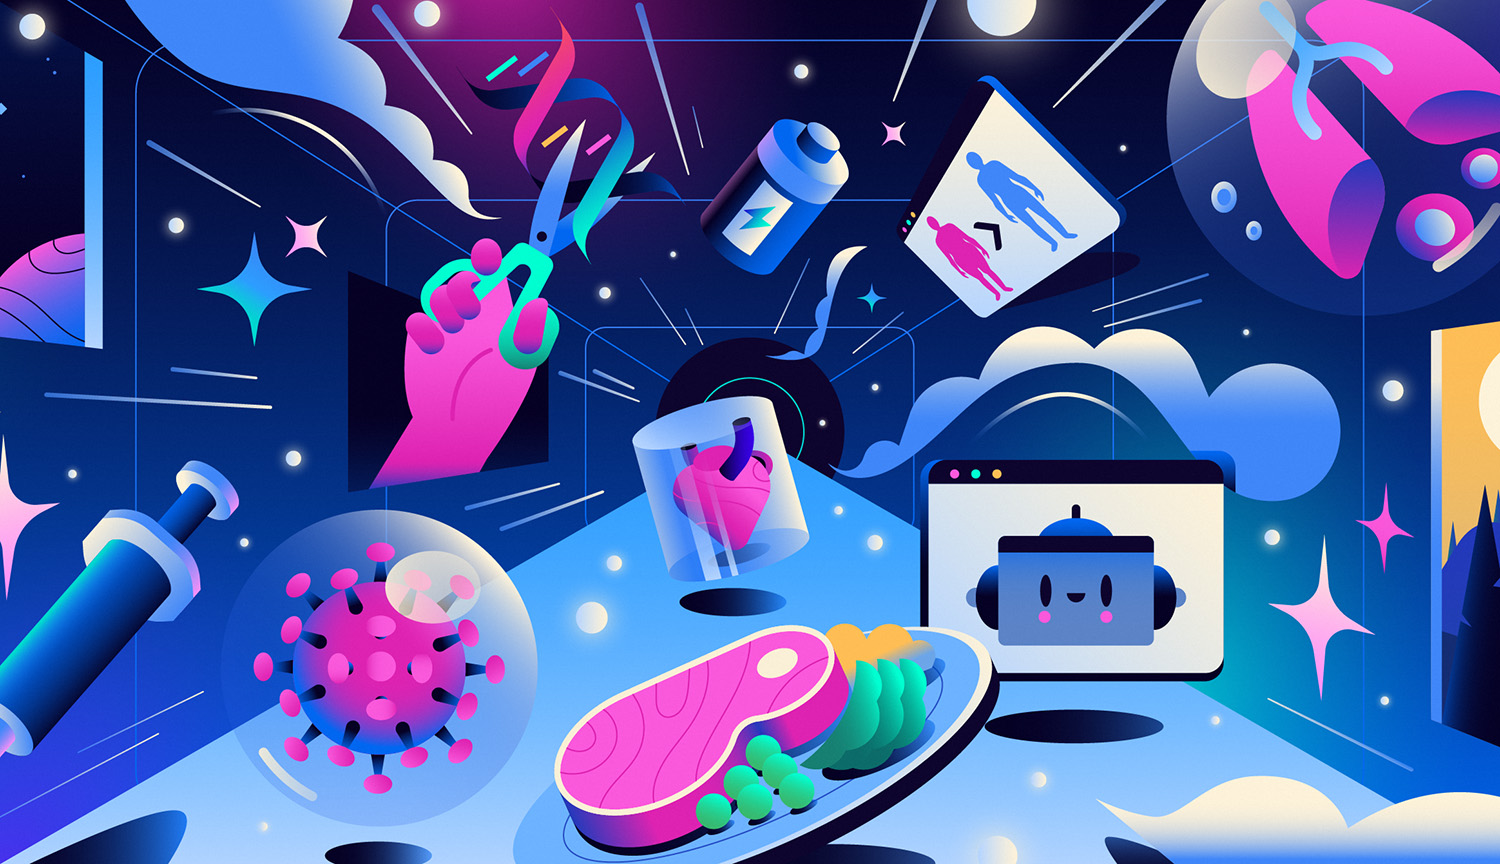 Conceptual illustration in bright colors includes syringe, the moon, meat, ocean waves, a virus, flames, a battery and more.